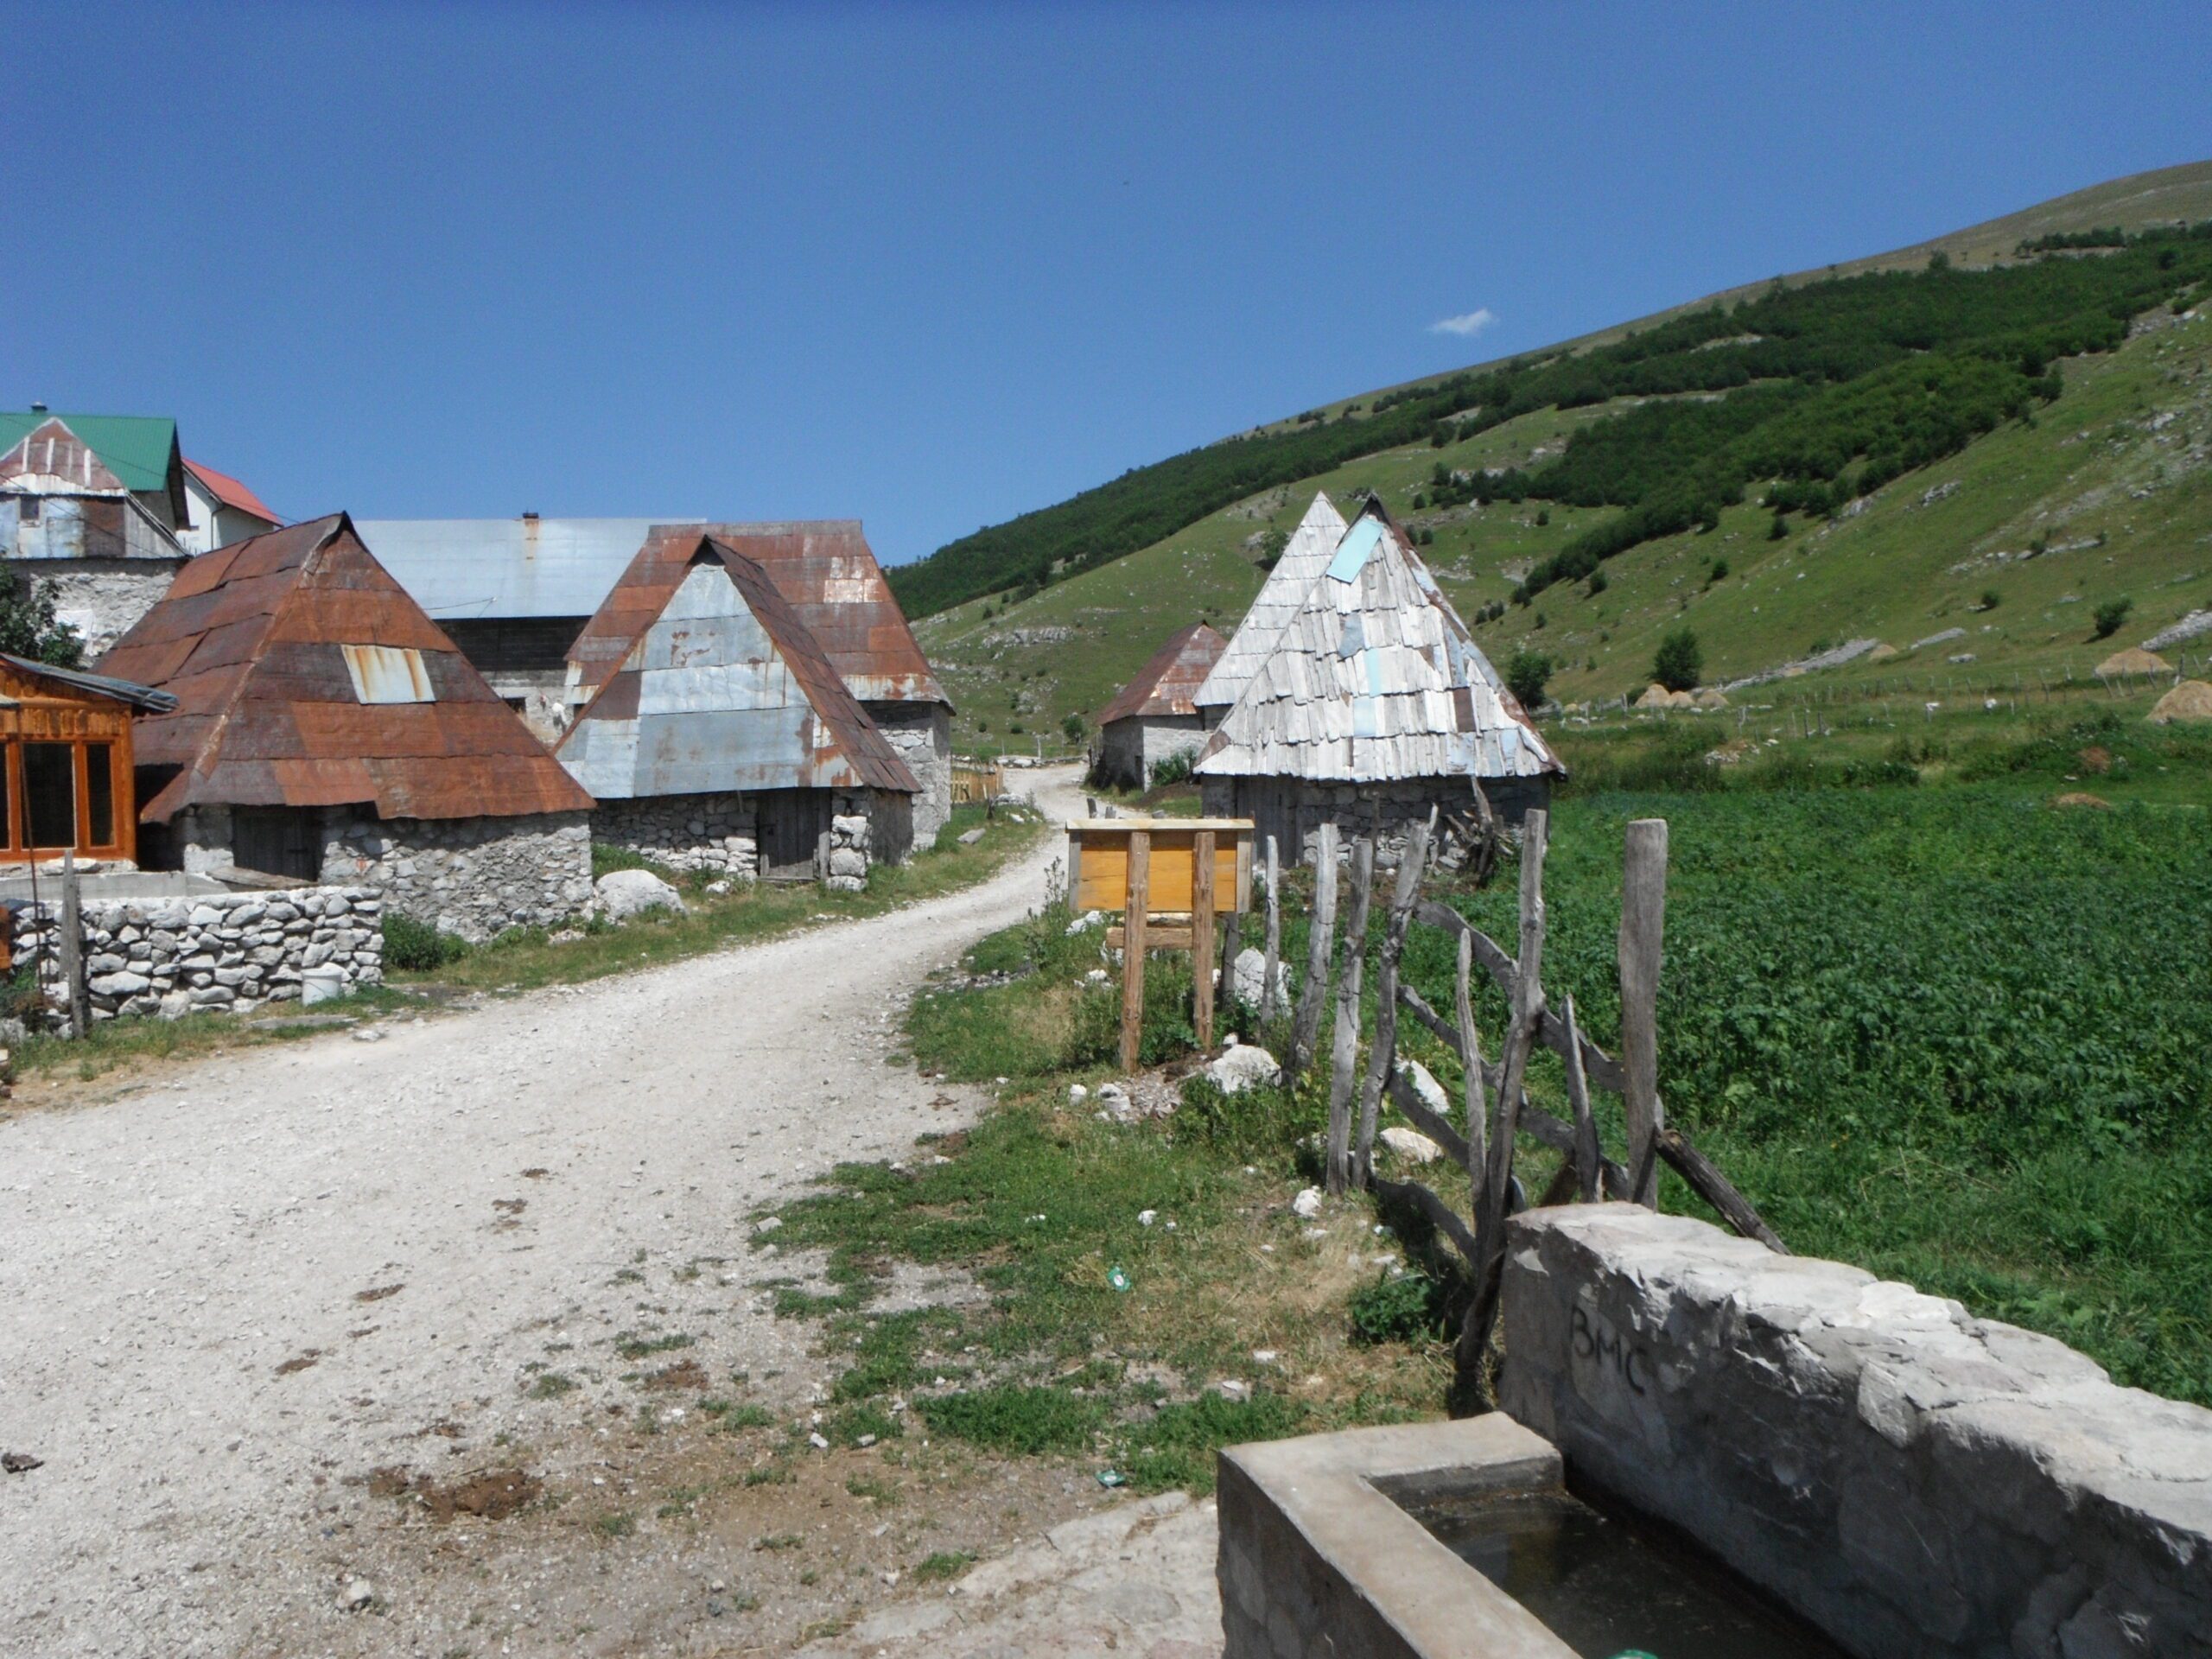 Stepping Back in time, Lukomir Village in the mountains.